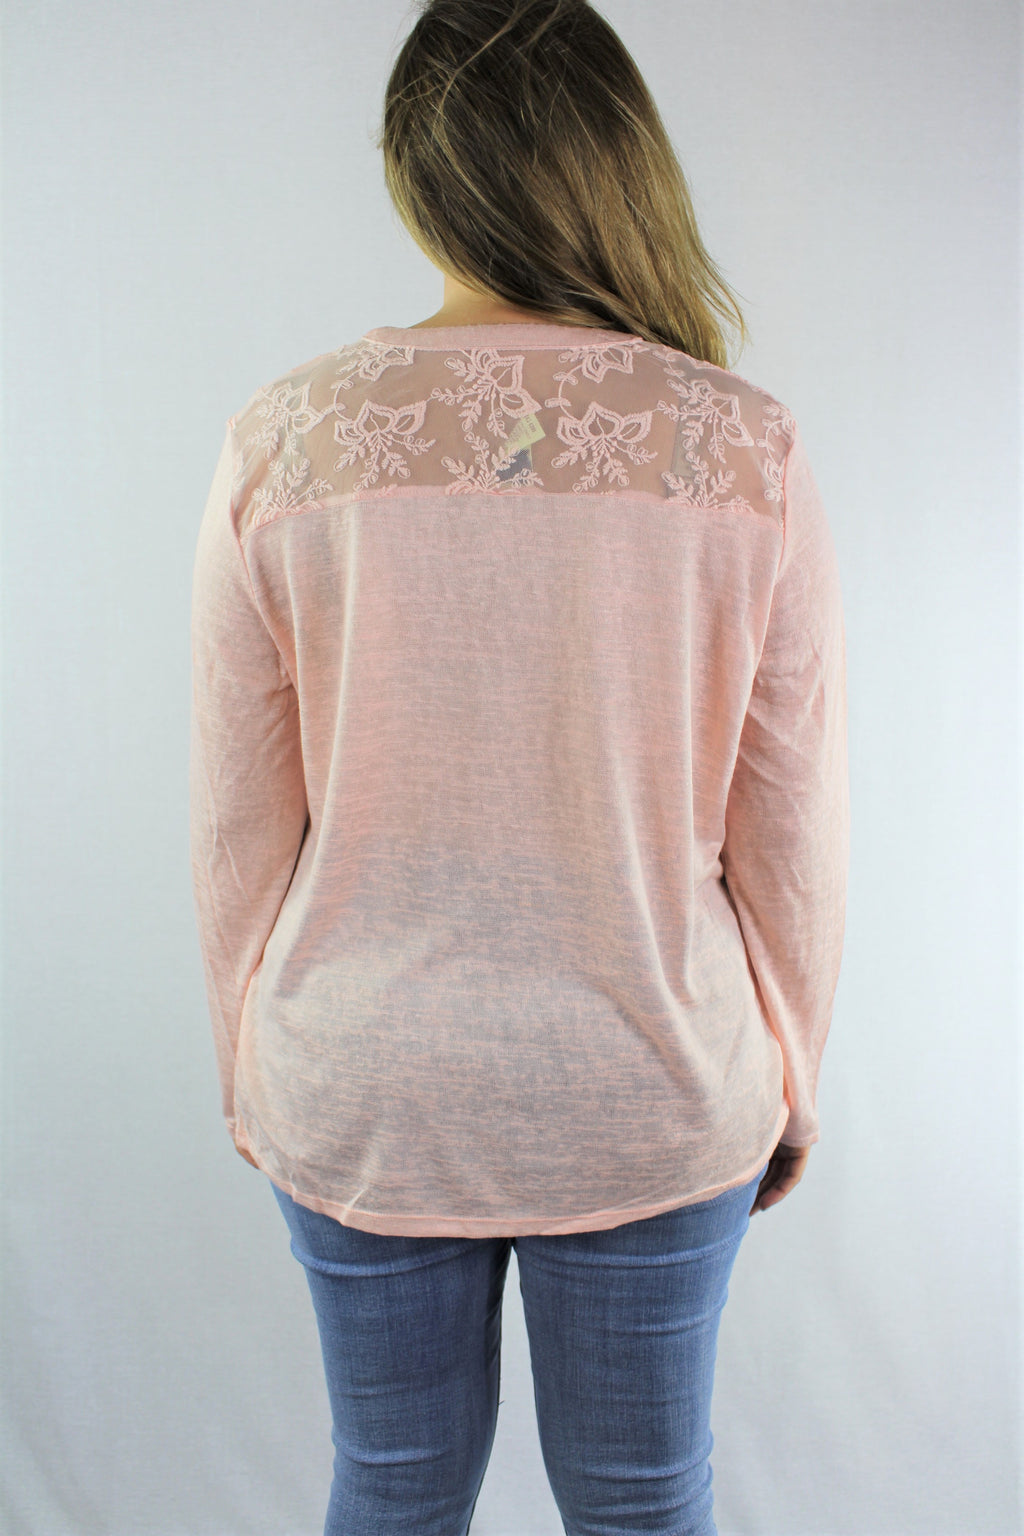 Plus Size Long Sleeve Top with Lace Detail